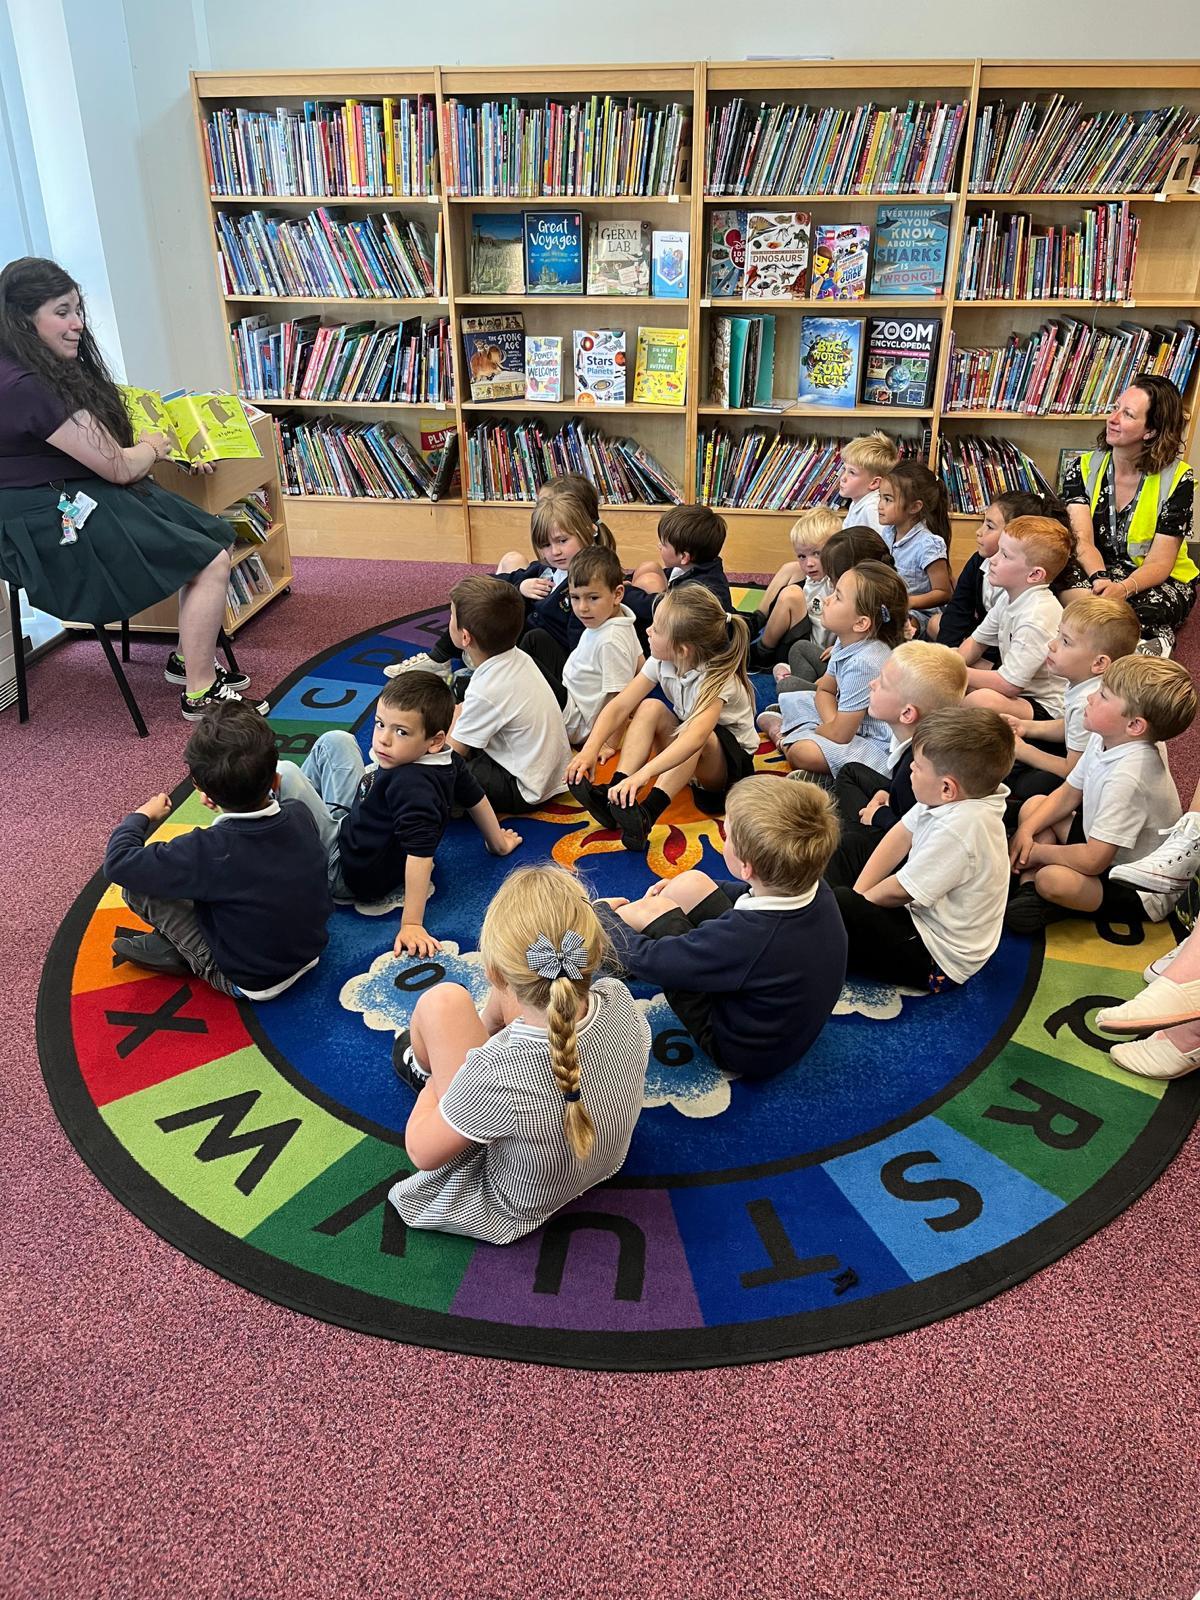 Storytime for Ysgol Ty Ffynnon pupils at Connahs Quay Library.